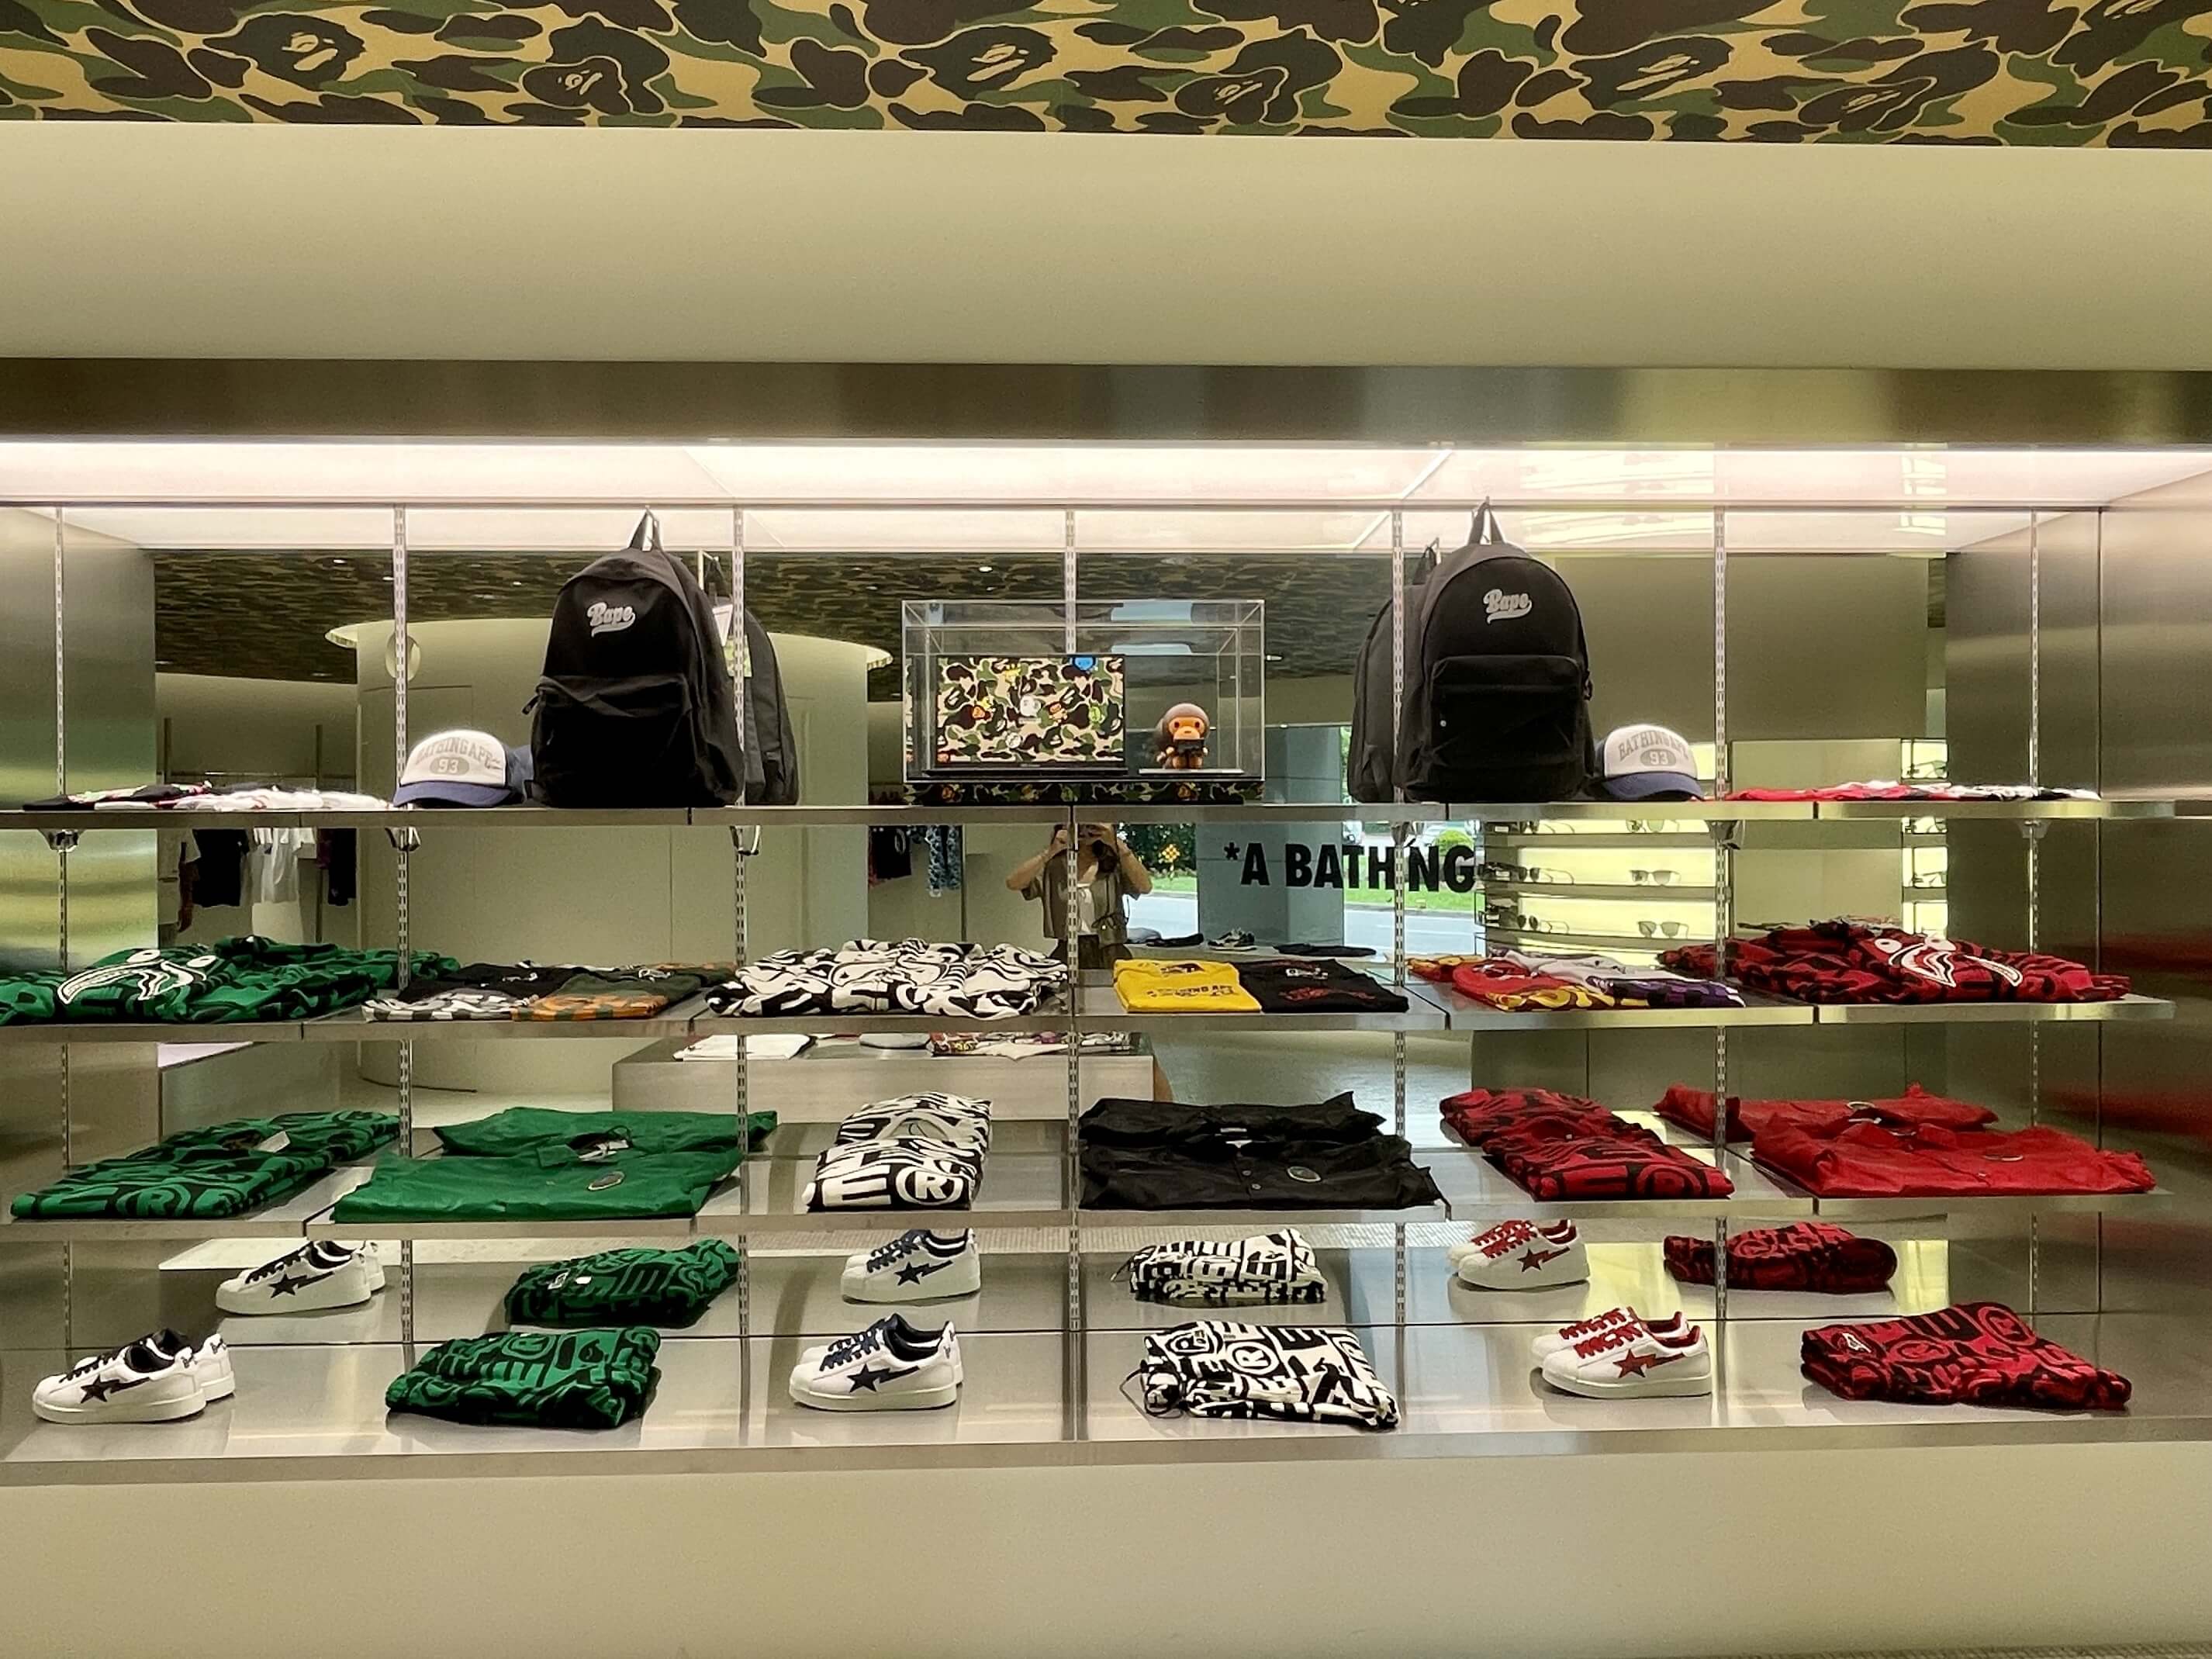 The image shows ASUS vivobook bape edition stand at BAPE store